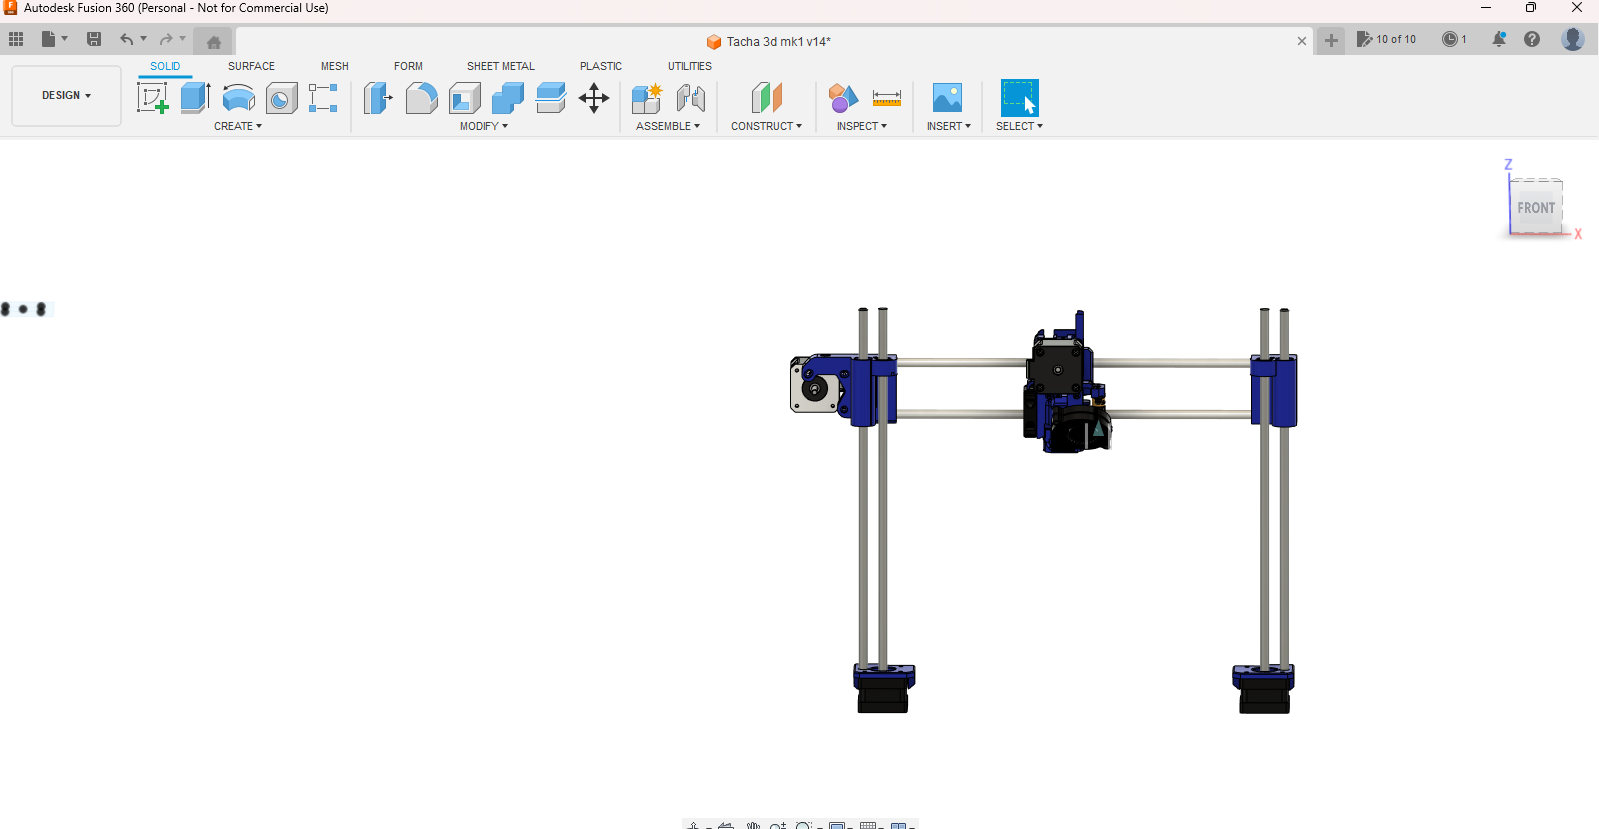 Autodesk Fusion 360 (Personal - Not for Commercial Use) 6_30_2023 9_20_12 PM.png